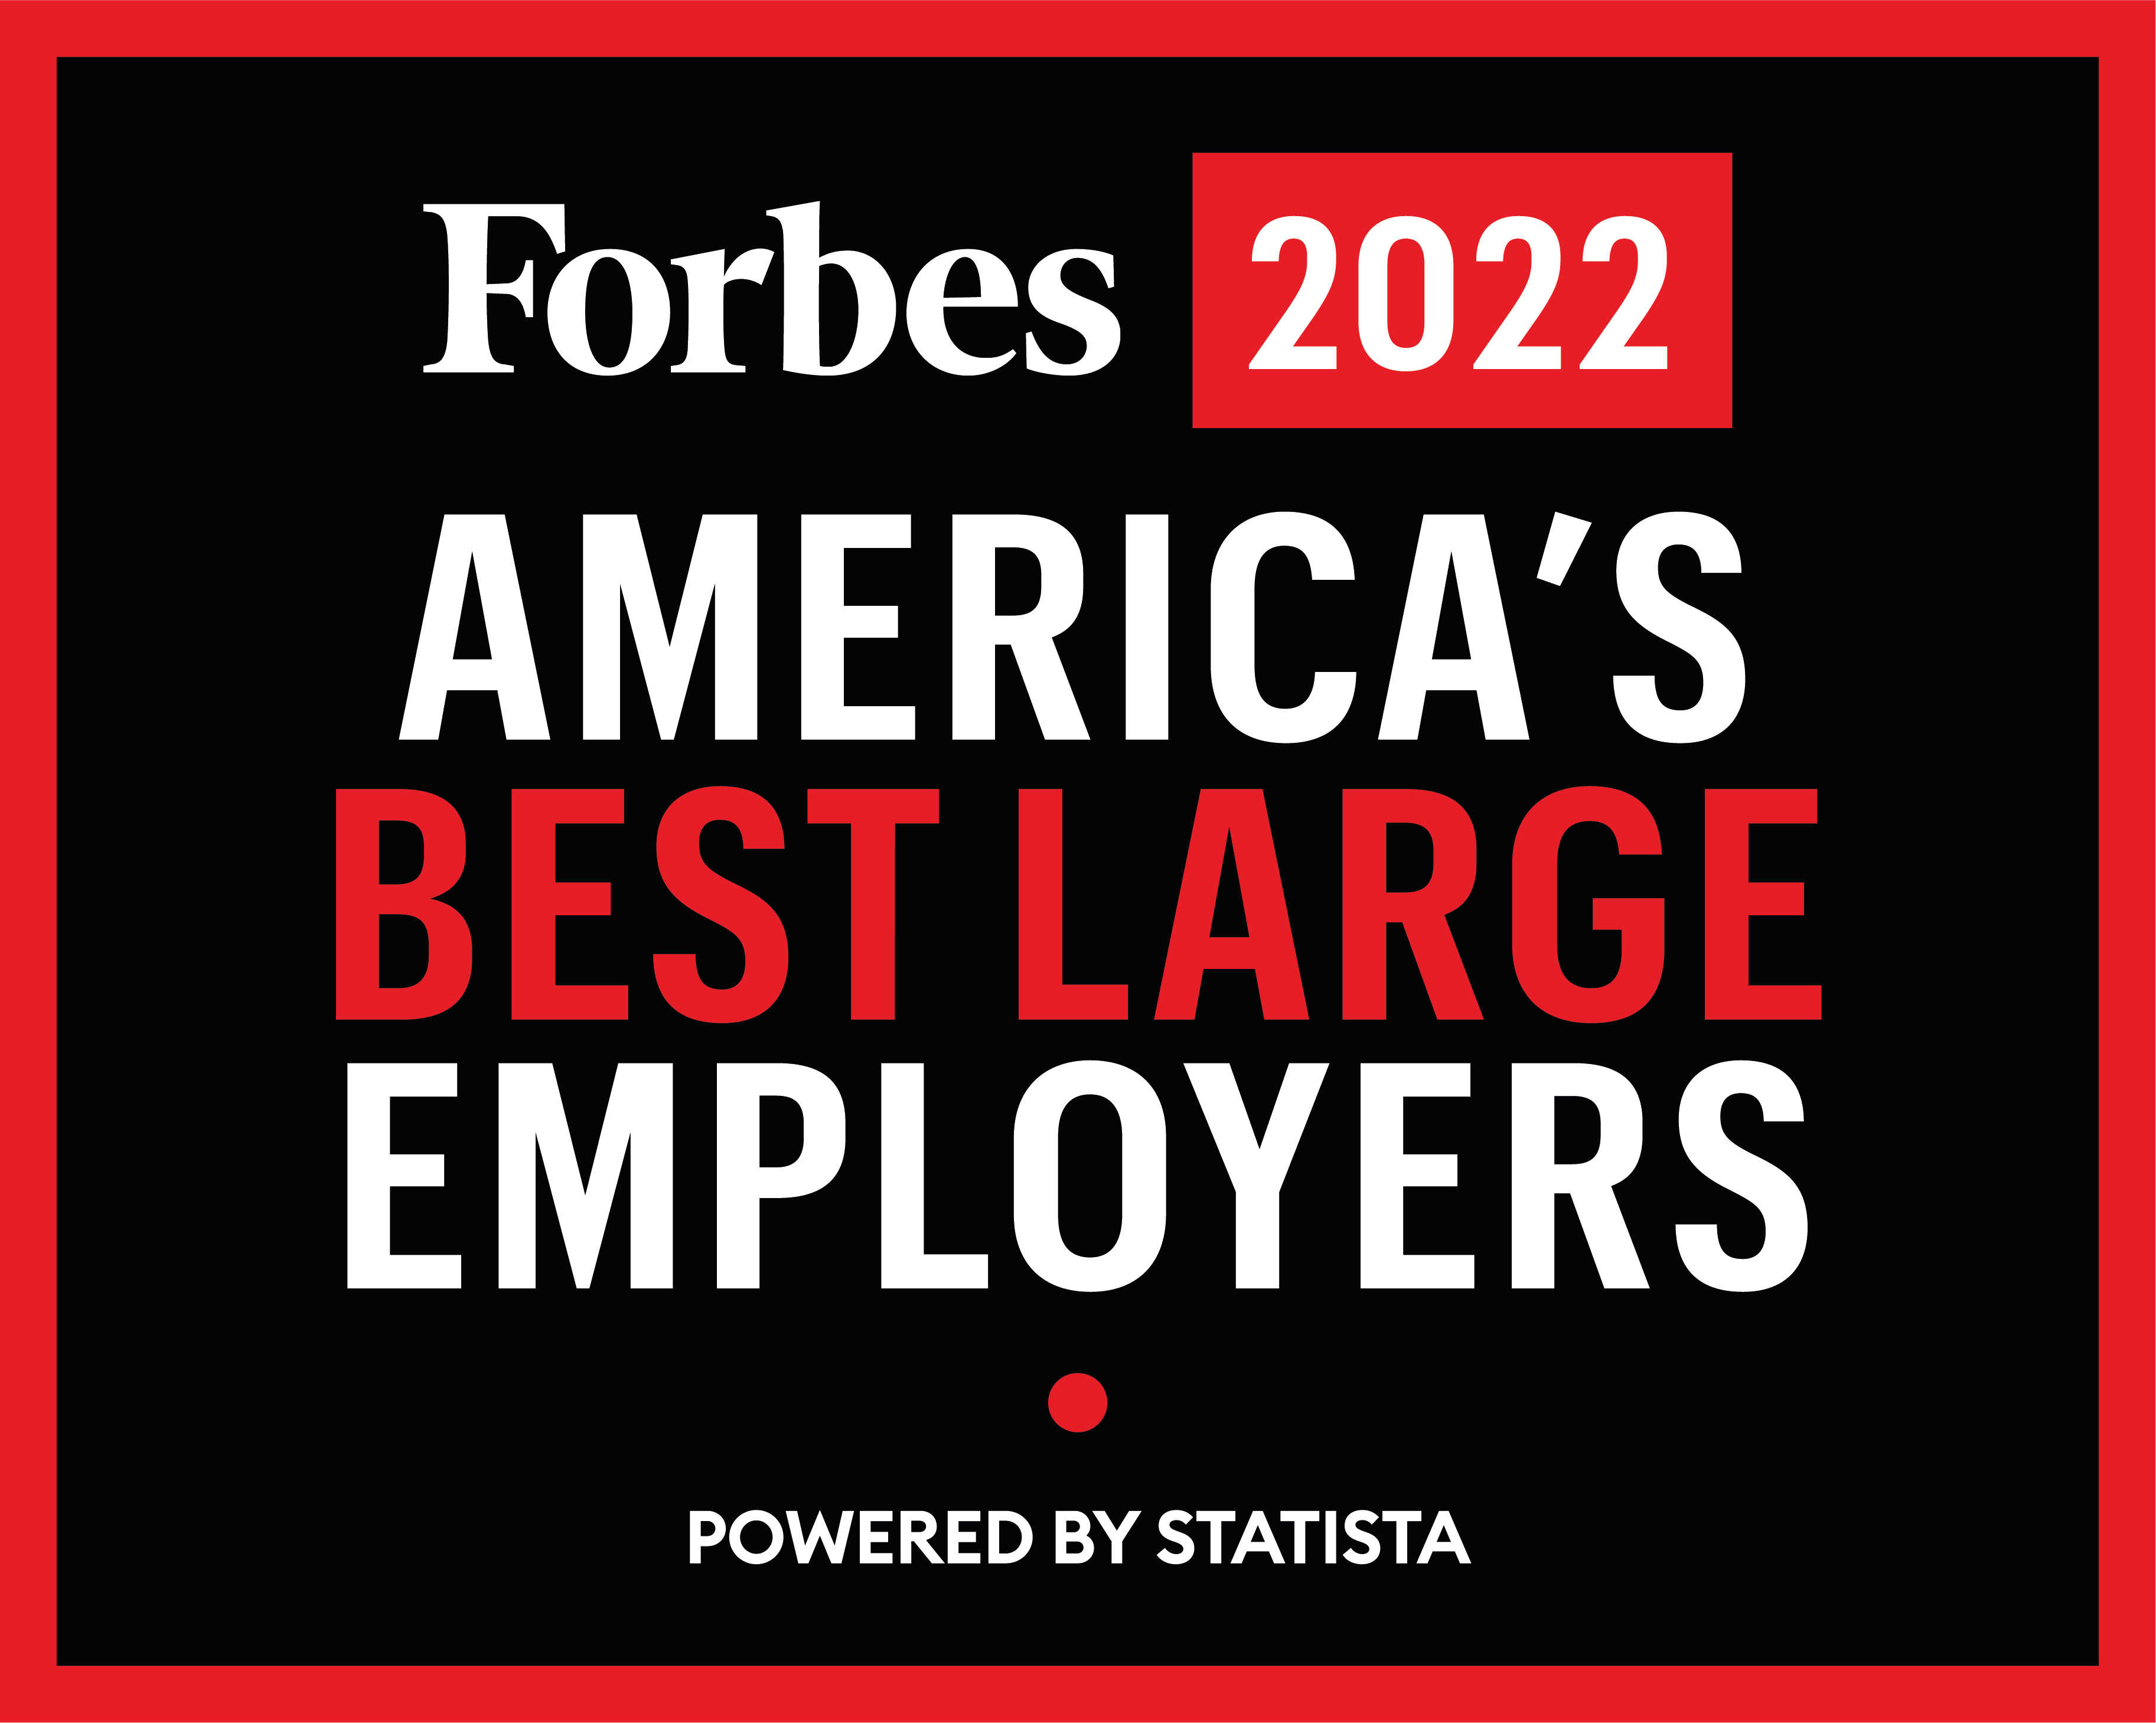 Forbes 2022 America’s Best Large Employers